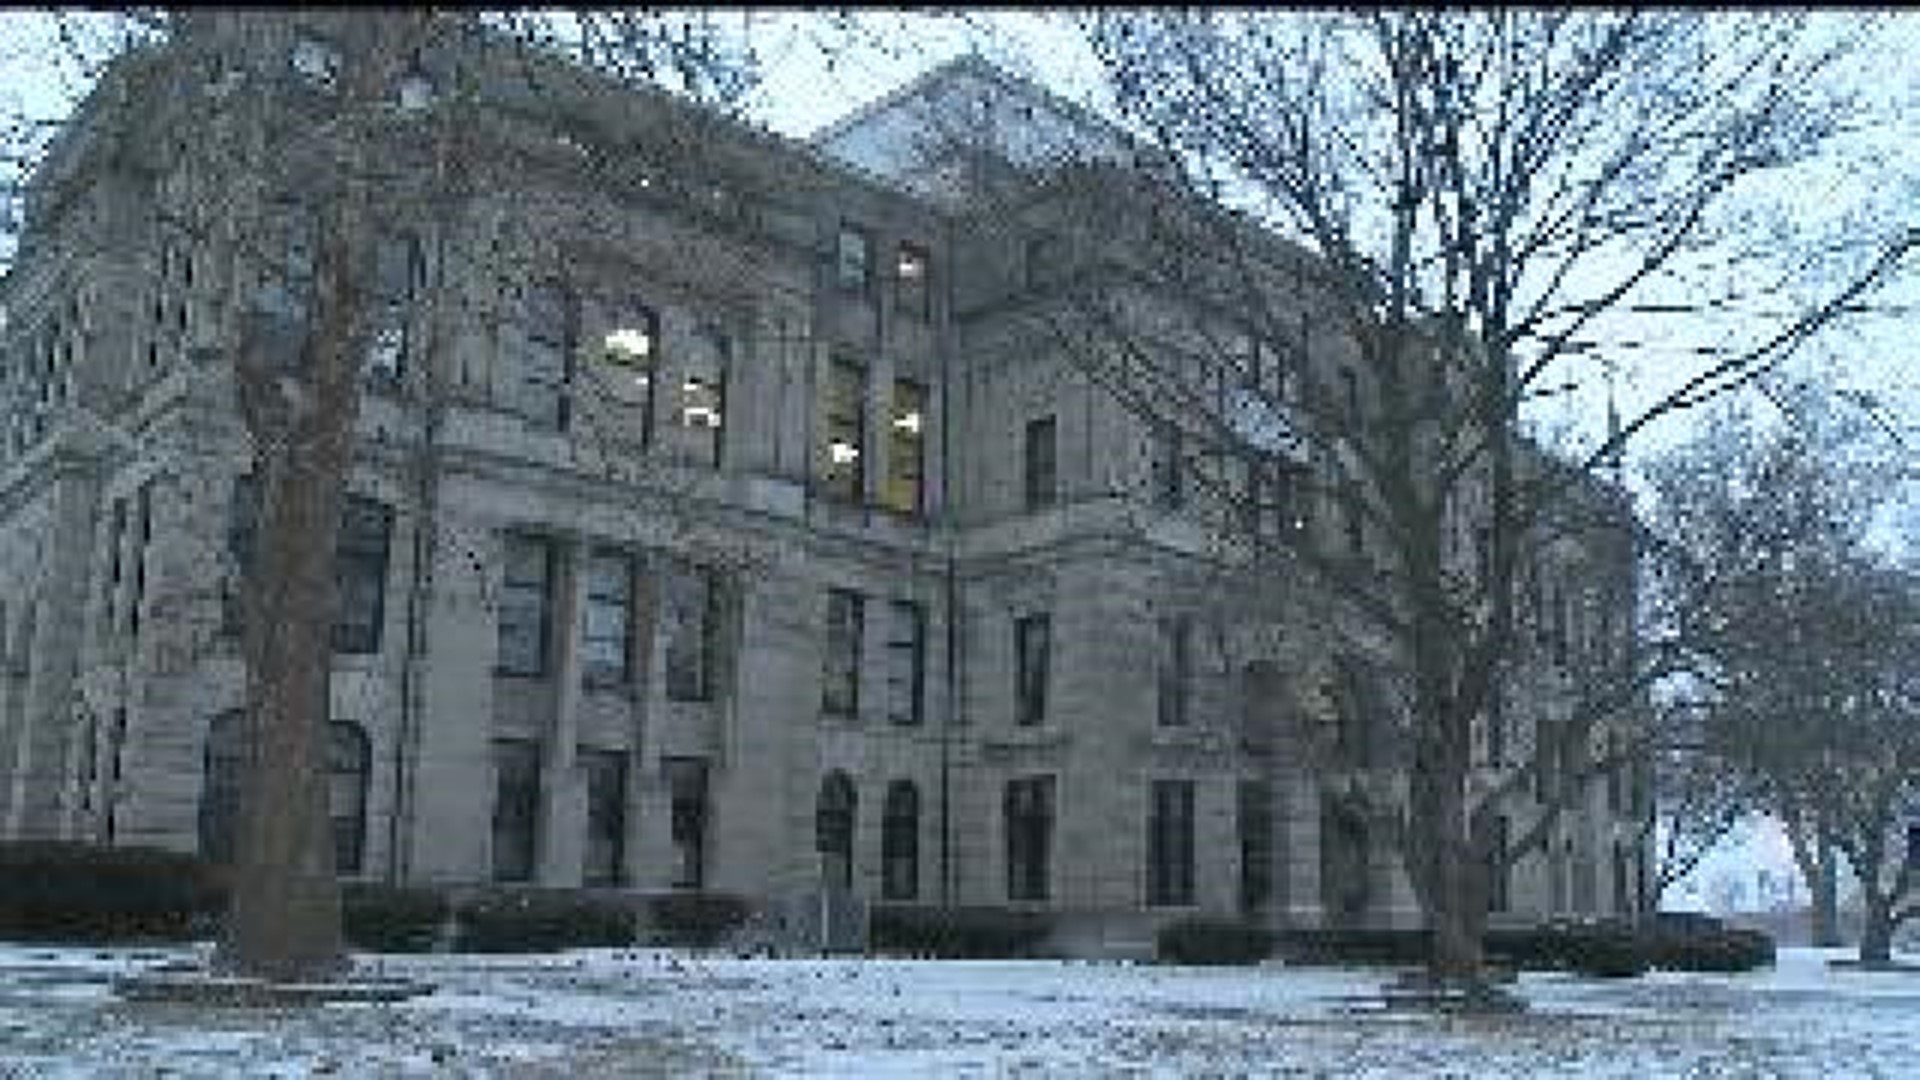 County Courthouse referendum voted down